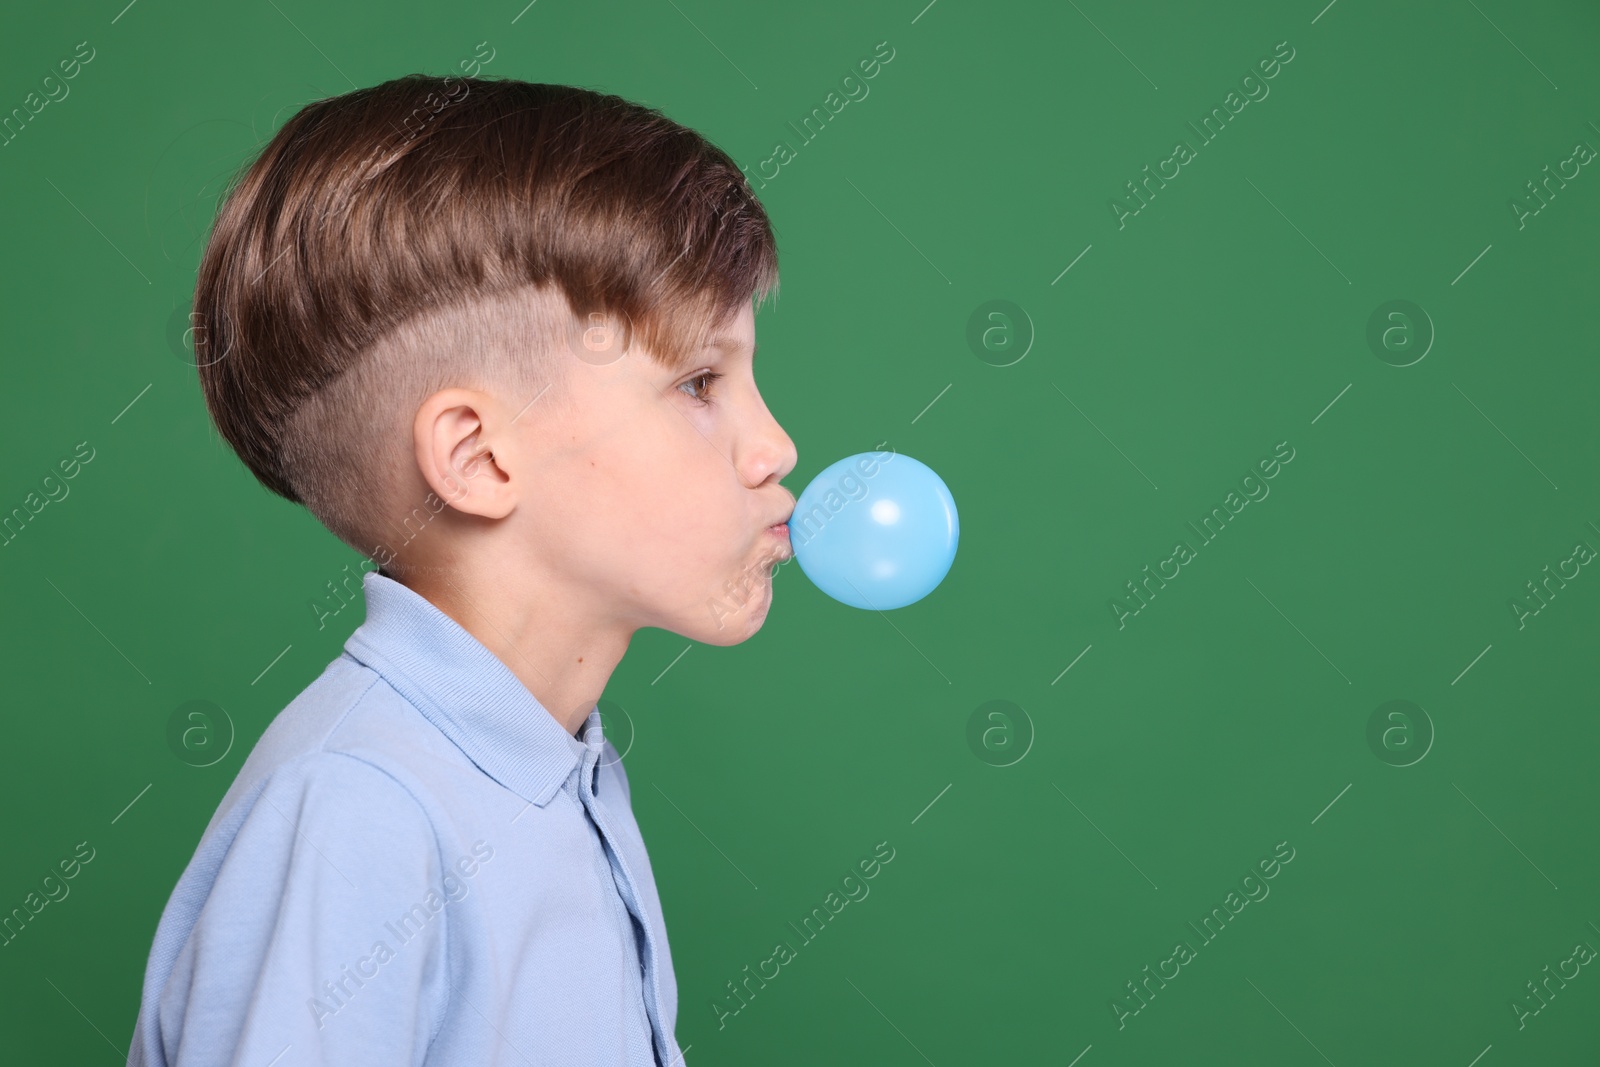 Photo of Boy blowing bubble gum on green background, space for text